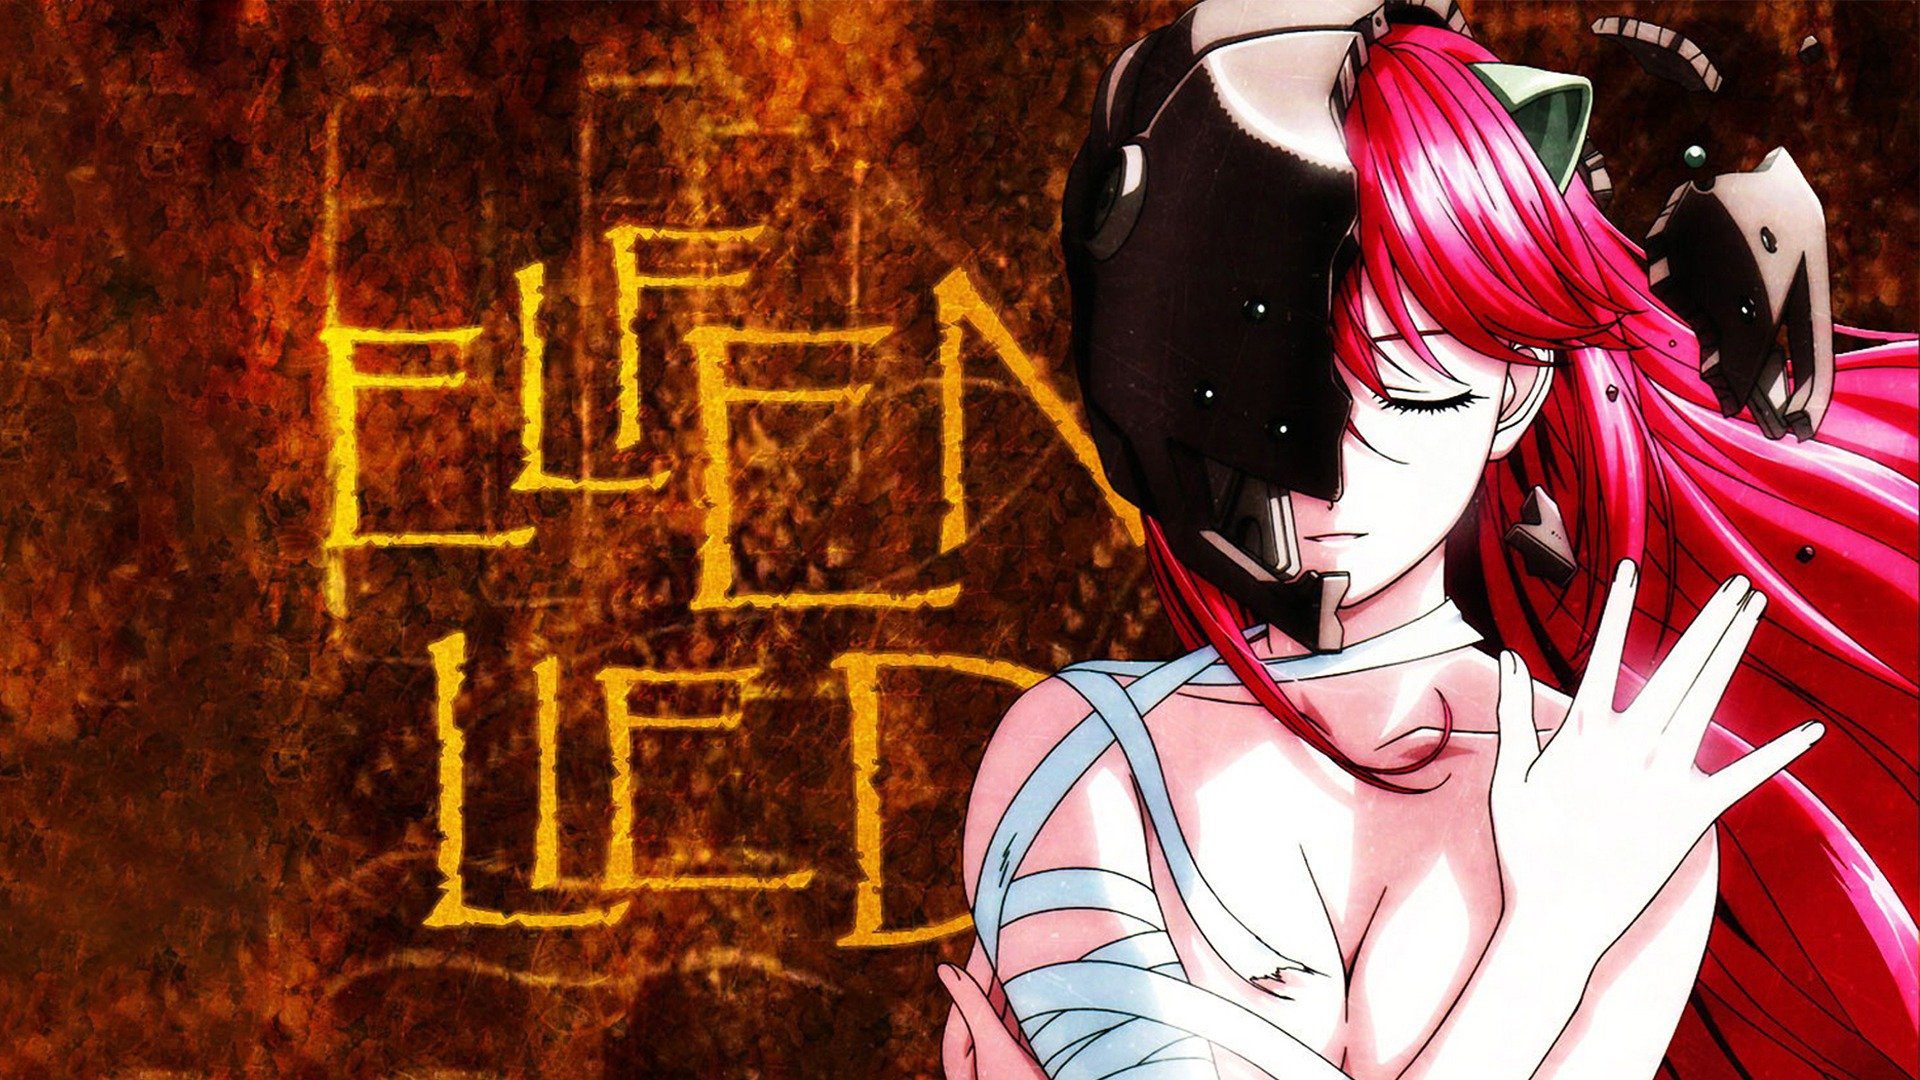 Top 10 Best Anime Opening Themes From The 2000s - Elfen Lied OP